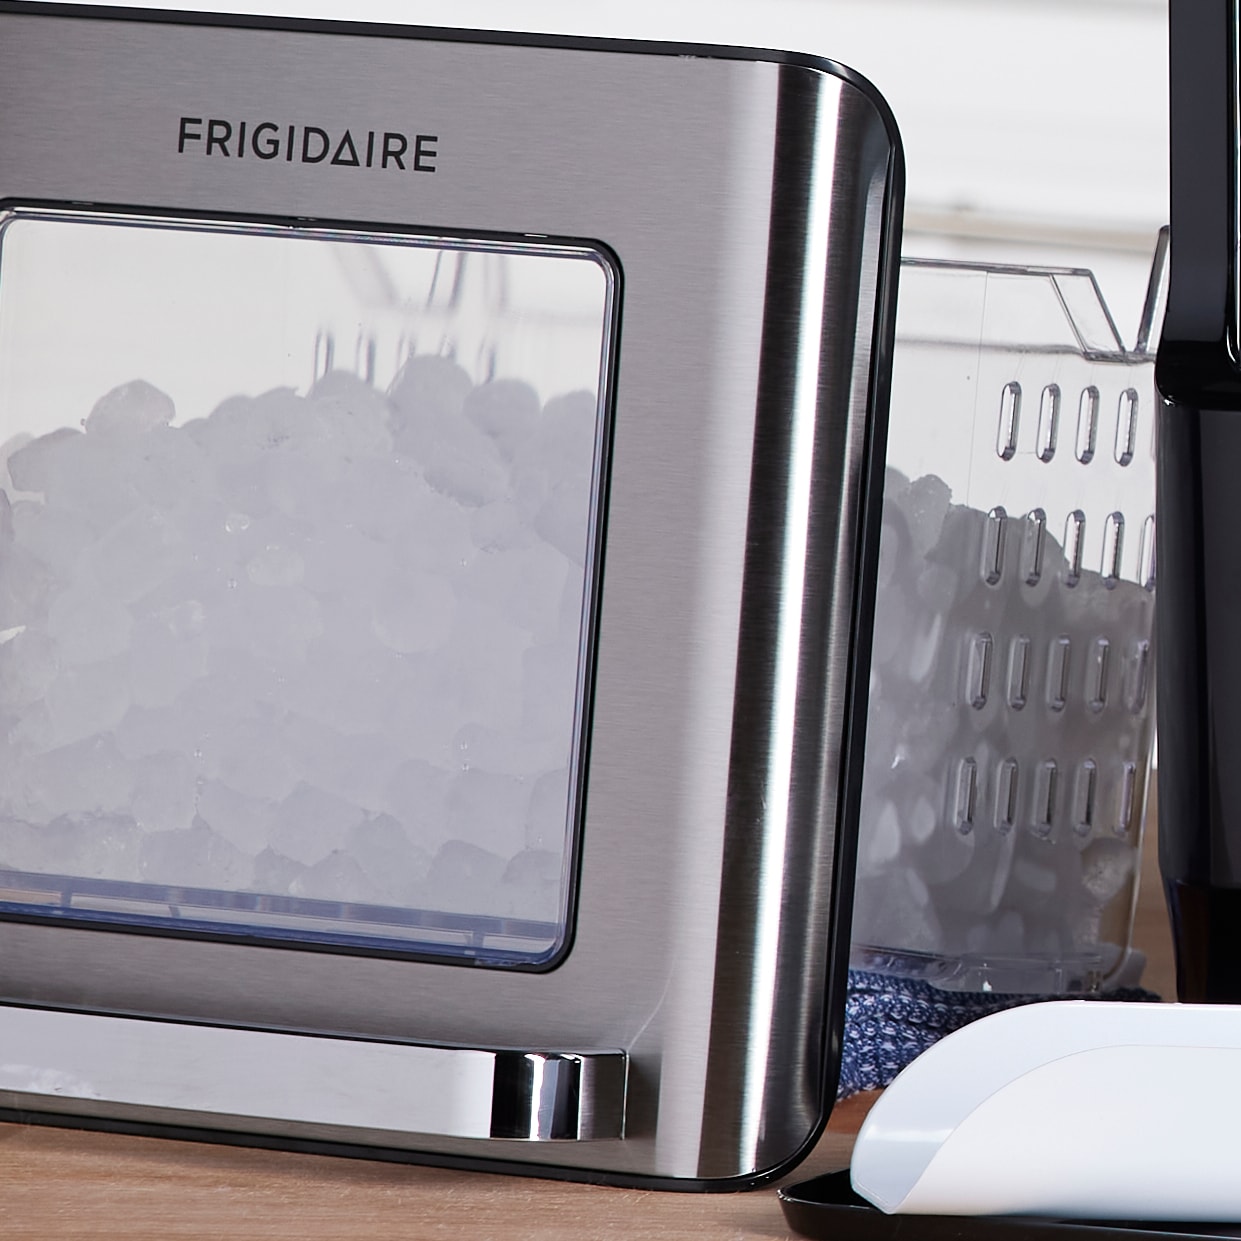 Frigidaire EFIC237 Countertop Crunchy Chewable Nugget Ice Maker, 44lbs per  day, Auto Self Cleaning, Black Stainless